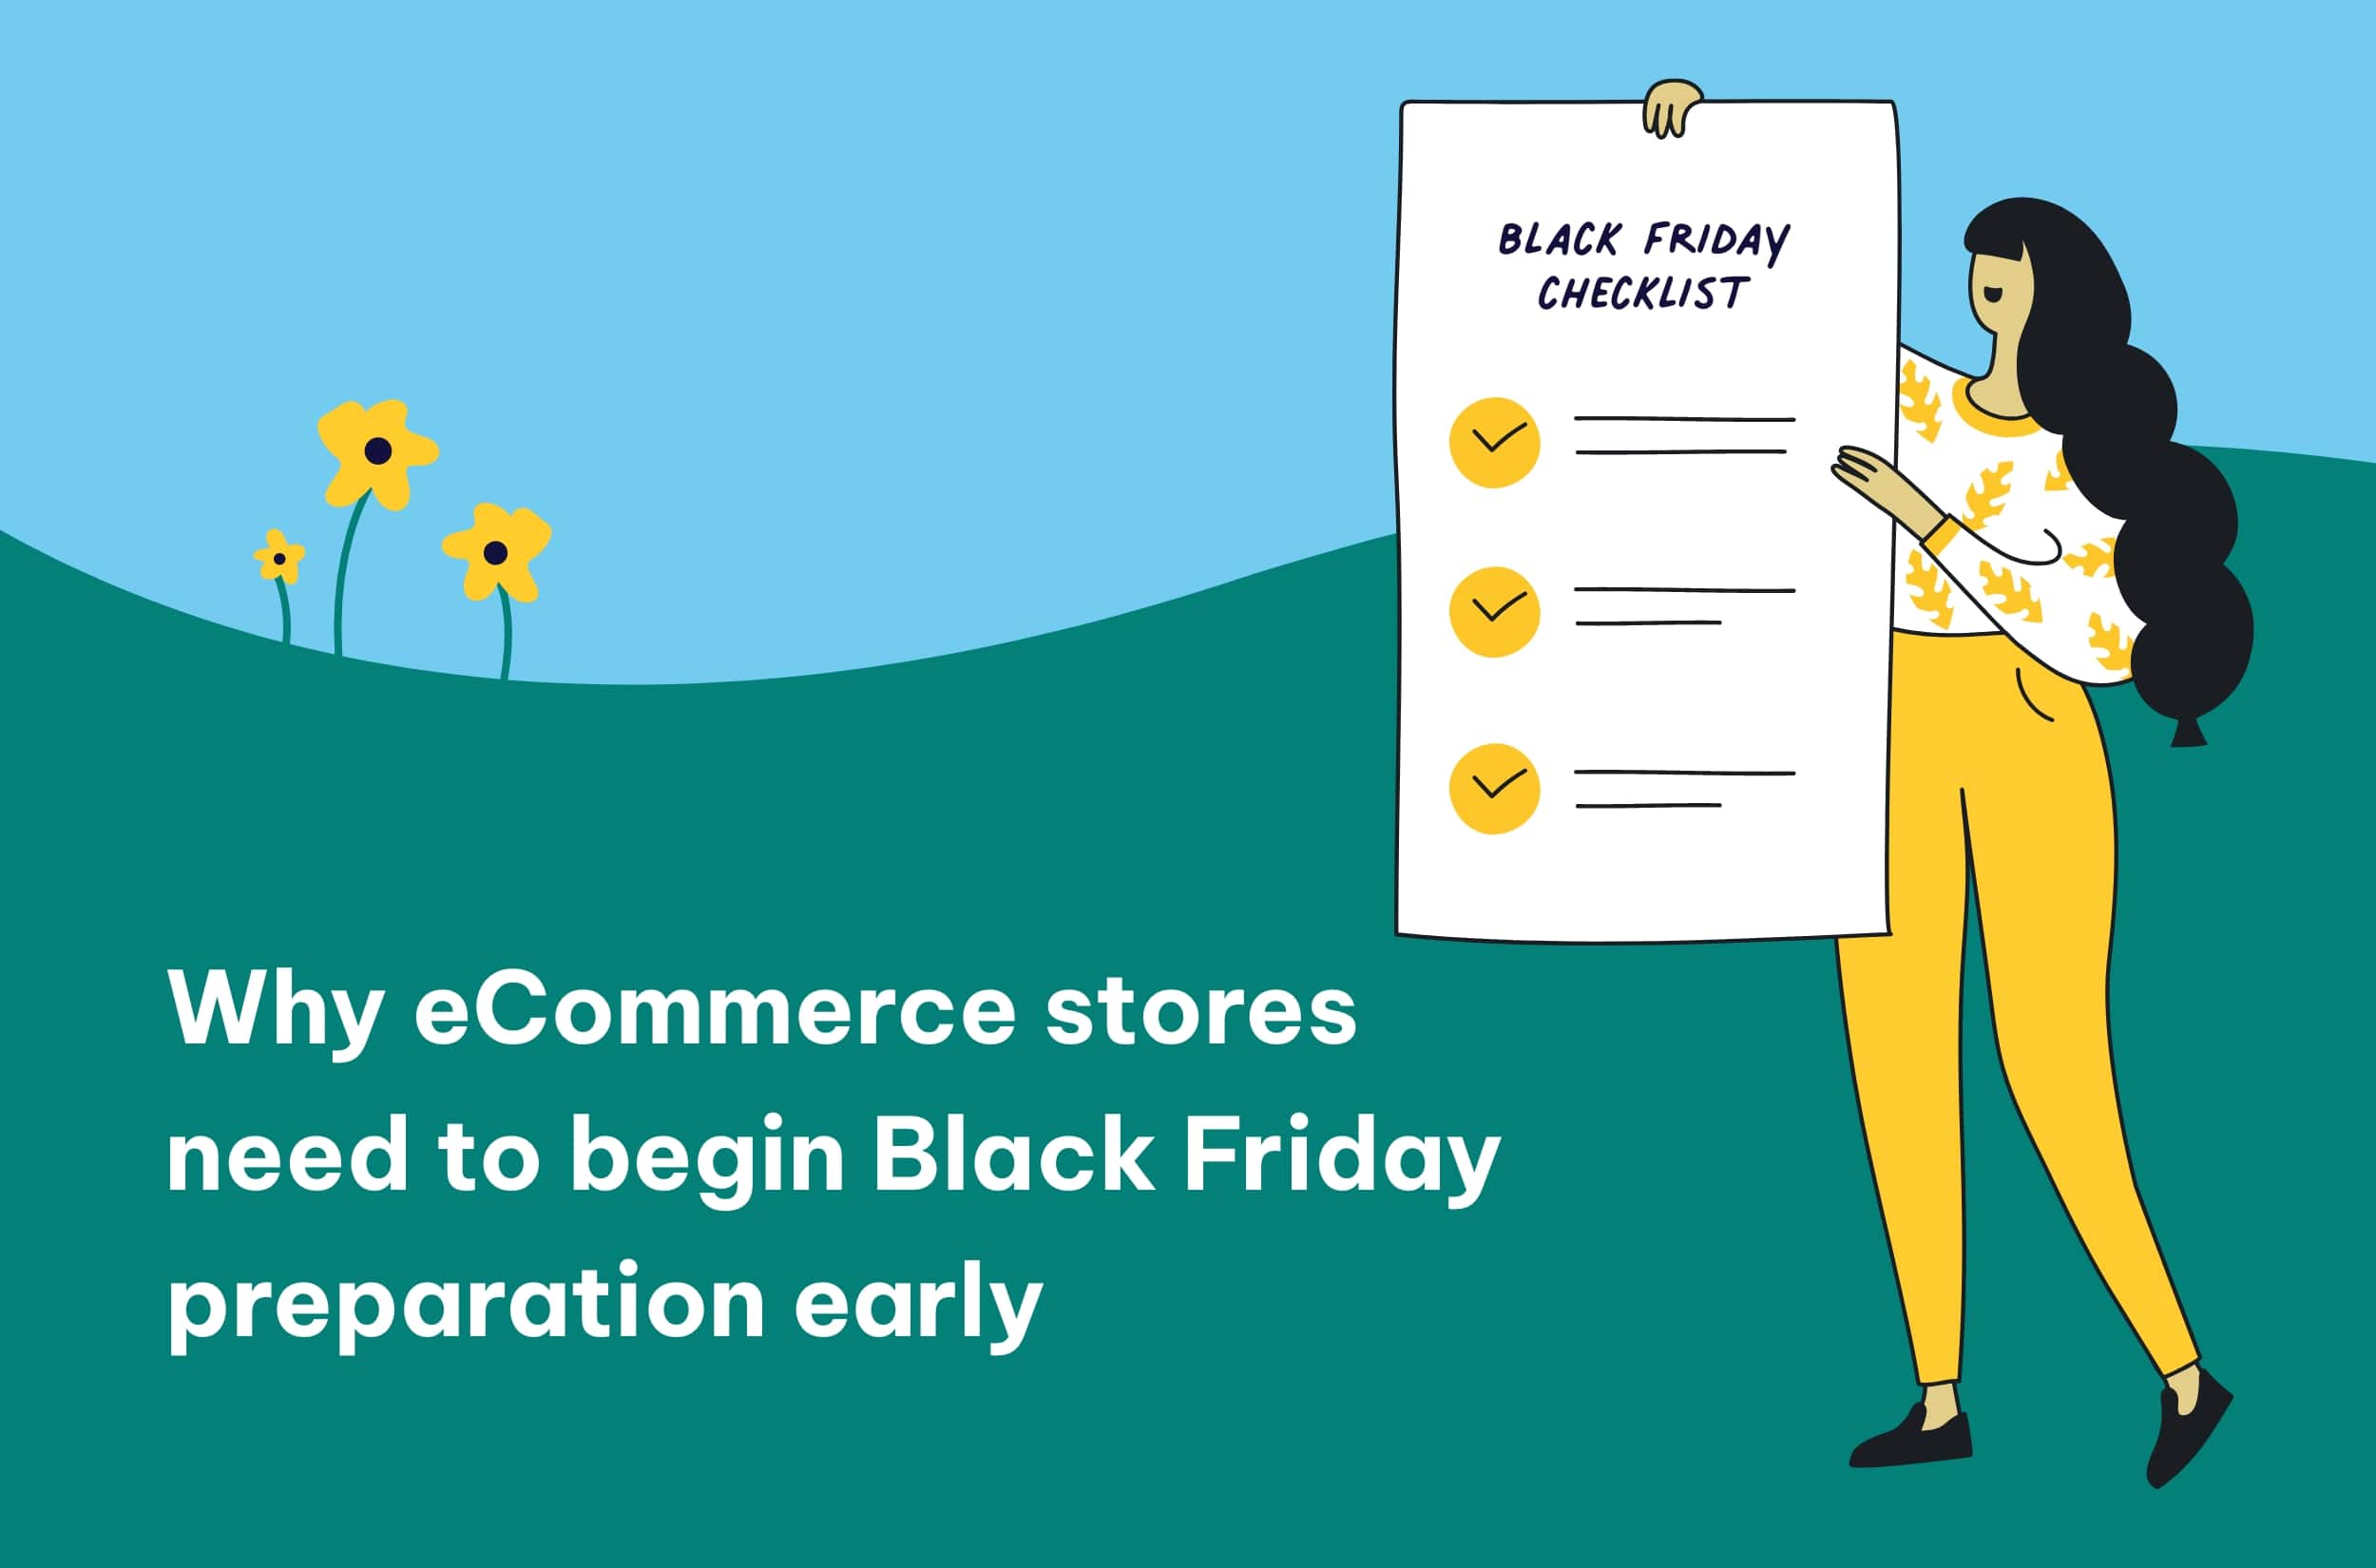 Why eCommerce stores need to begin Black Friday preparation early